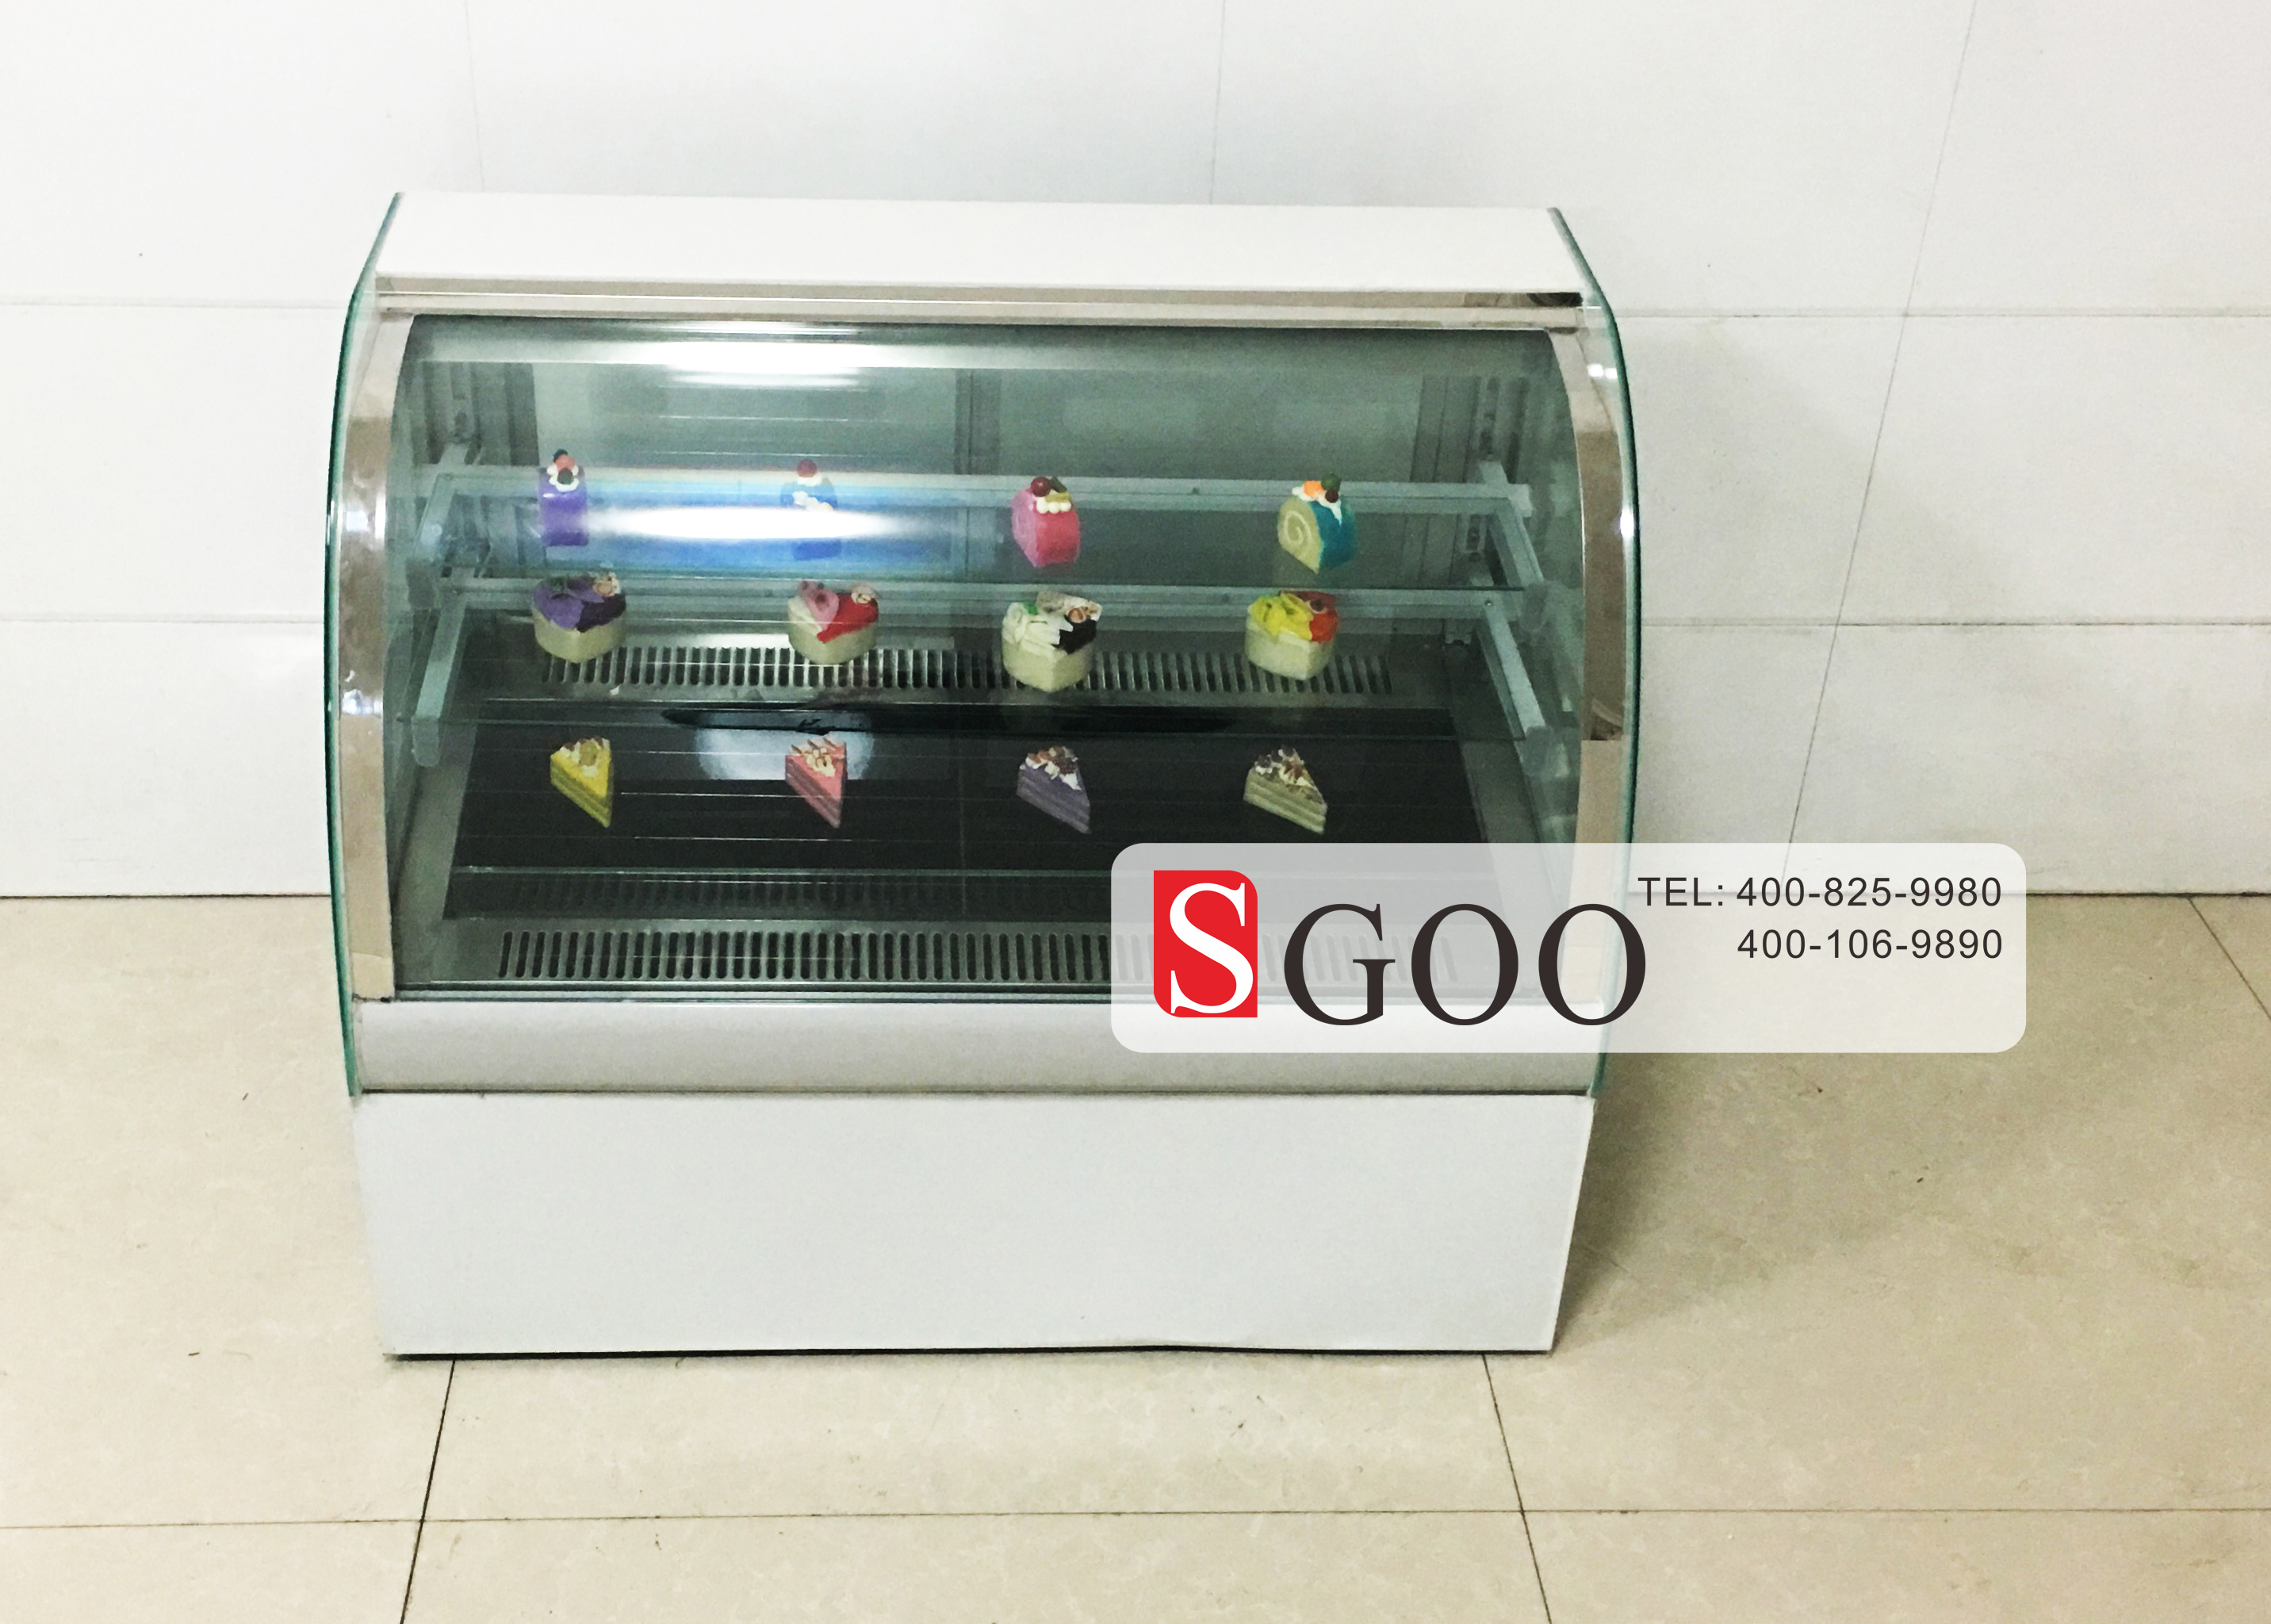 Display cases Thermal expansion valve installation precautions 